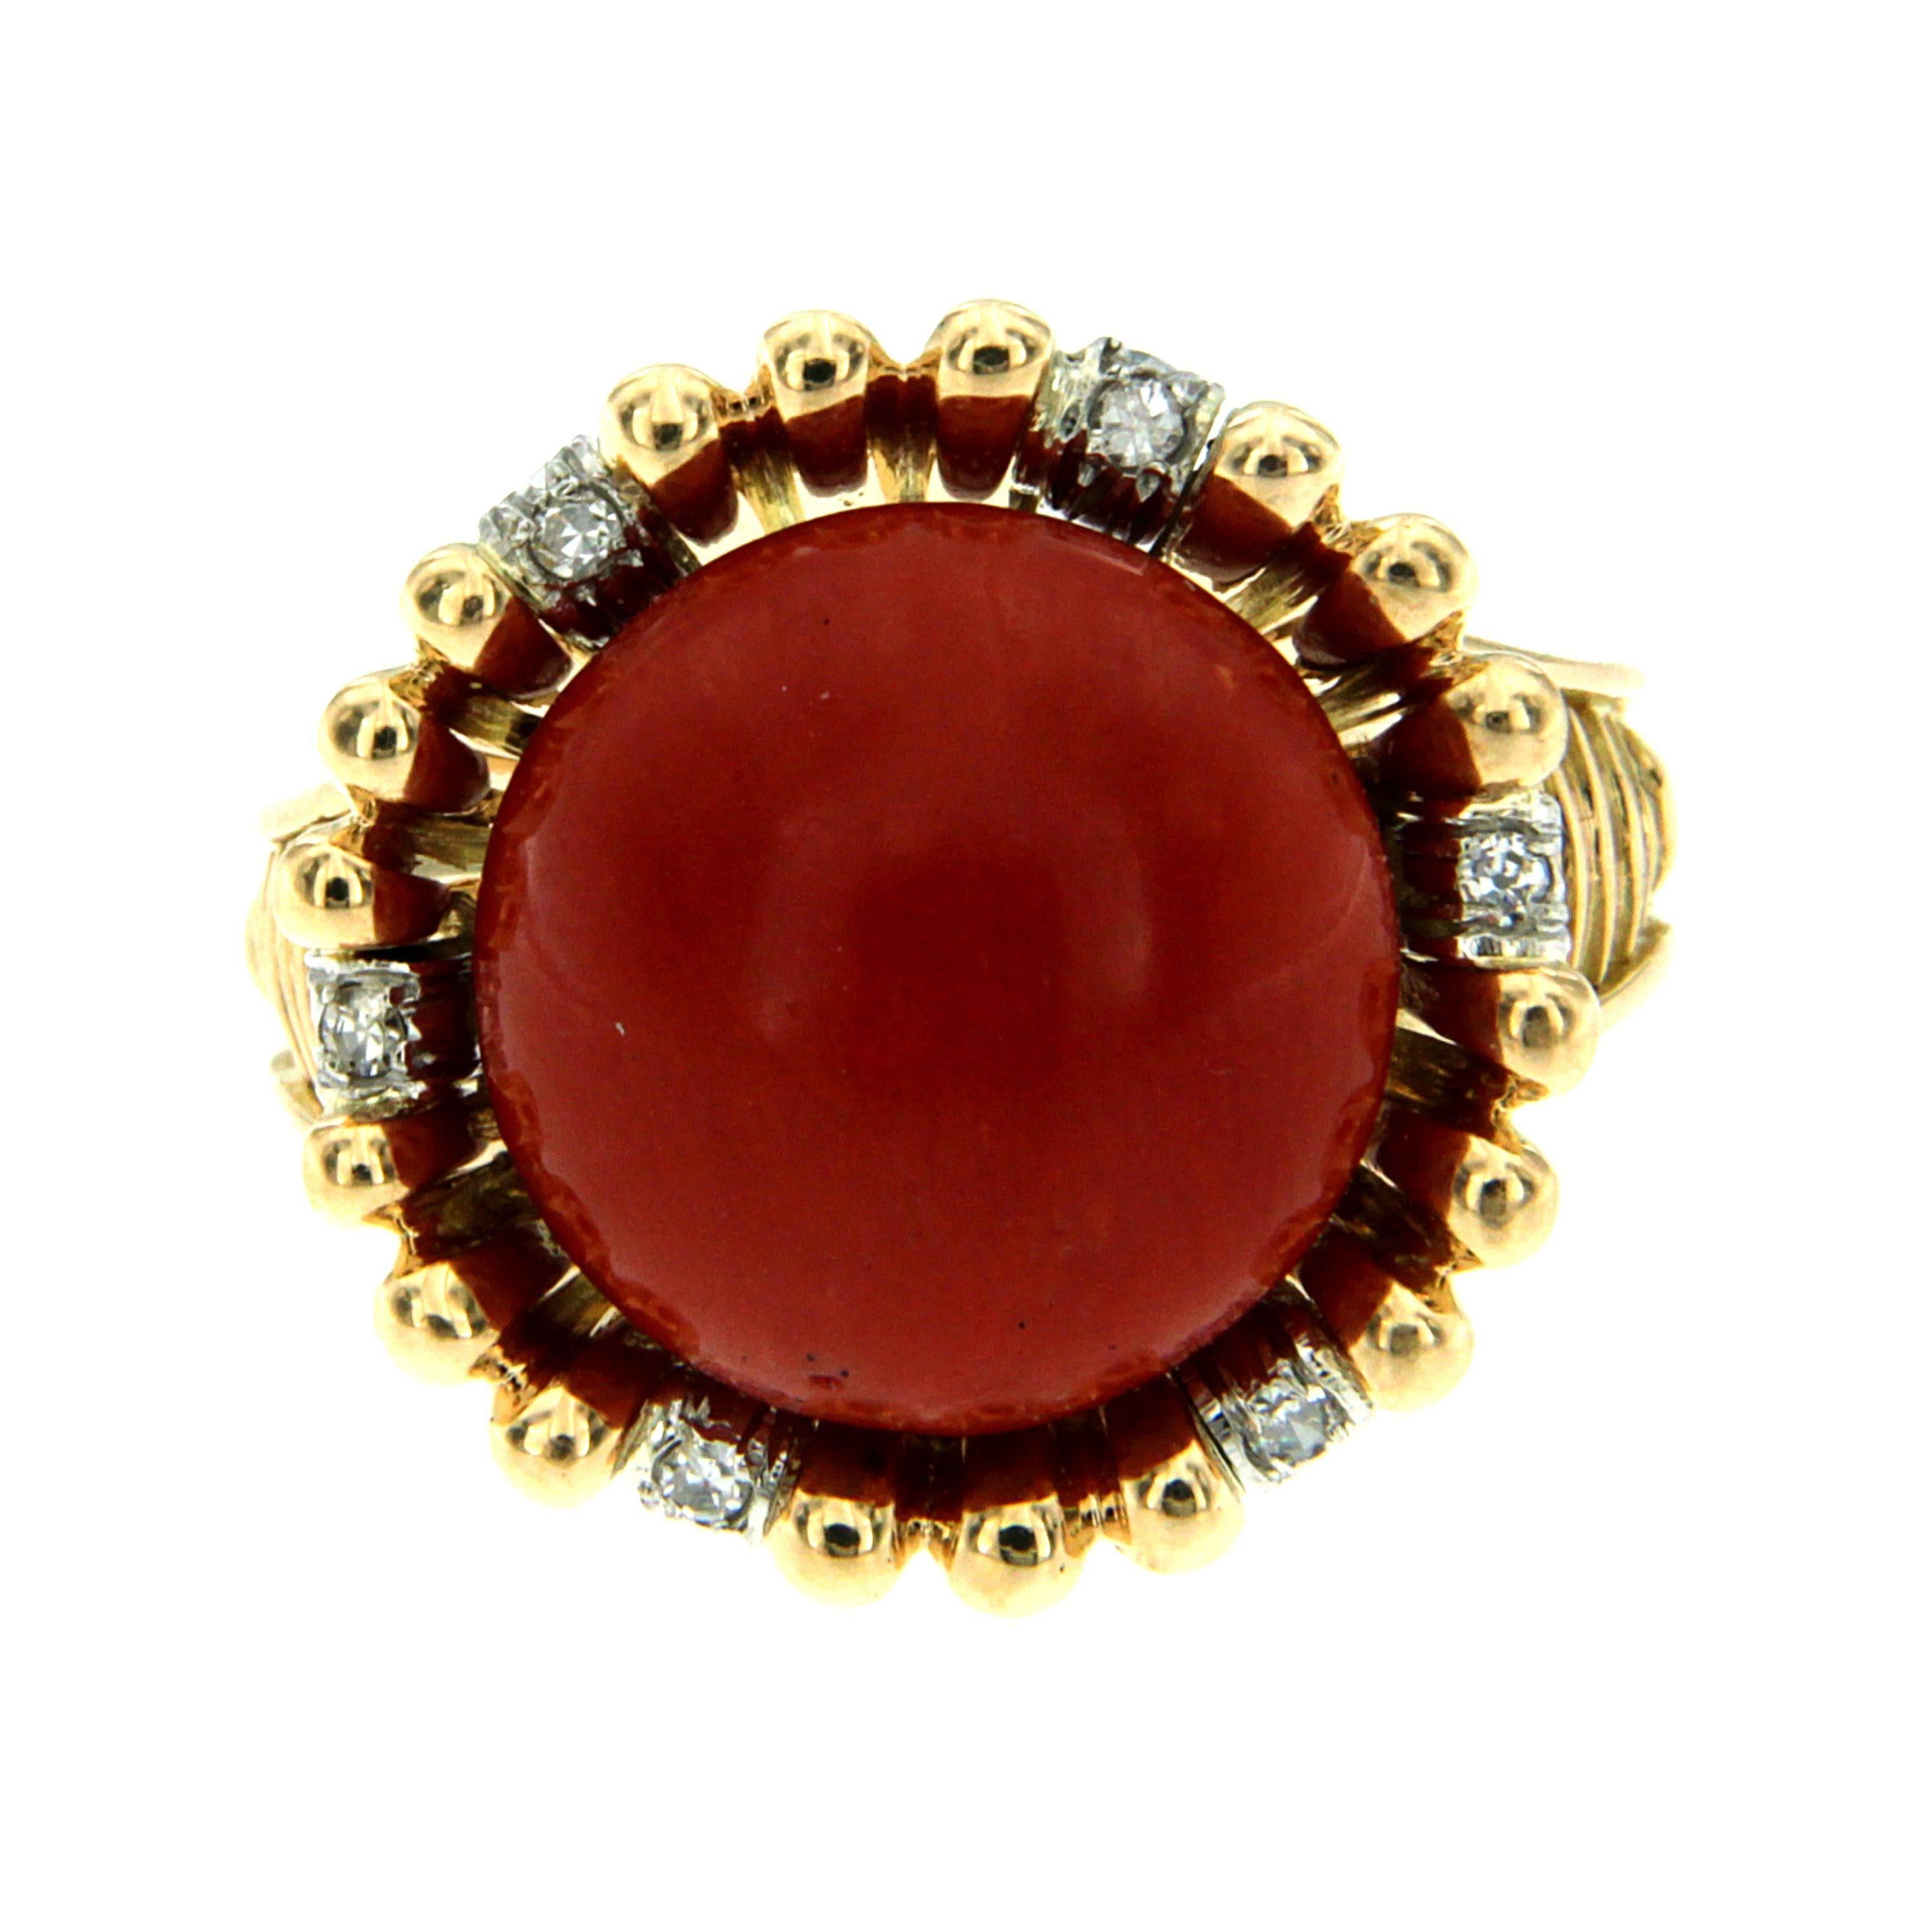 Authentic from 1950s this Beautiful ring is made of 18k yellow and white 18k Gold.
It is set with one exceptional large natural Mediterranean cabochon Coral surrounded by small diamonds.

CONDITION: Pre-Owned - Excellent 
METAL: 18k yellow and white